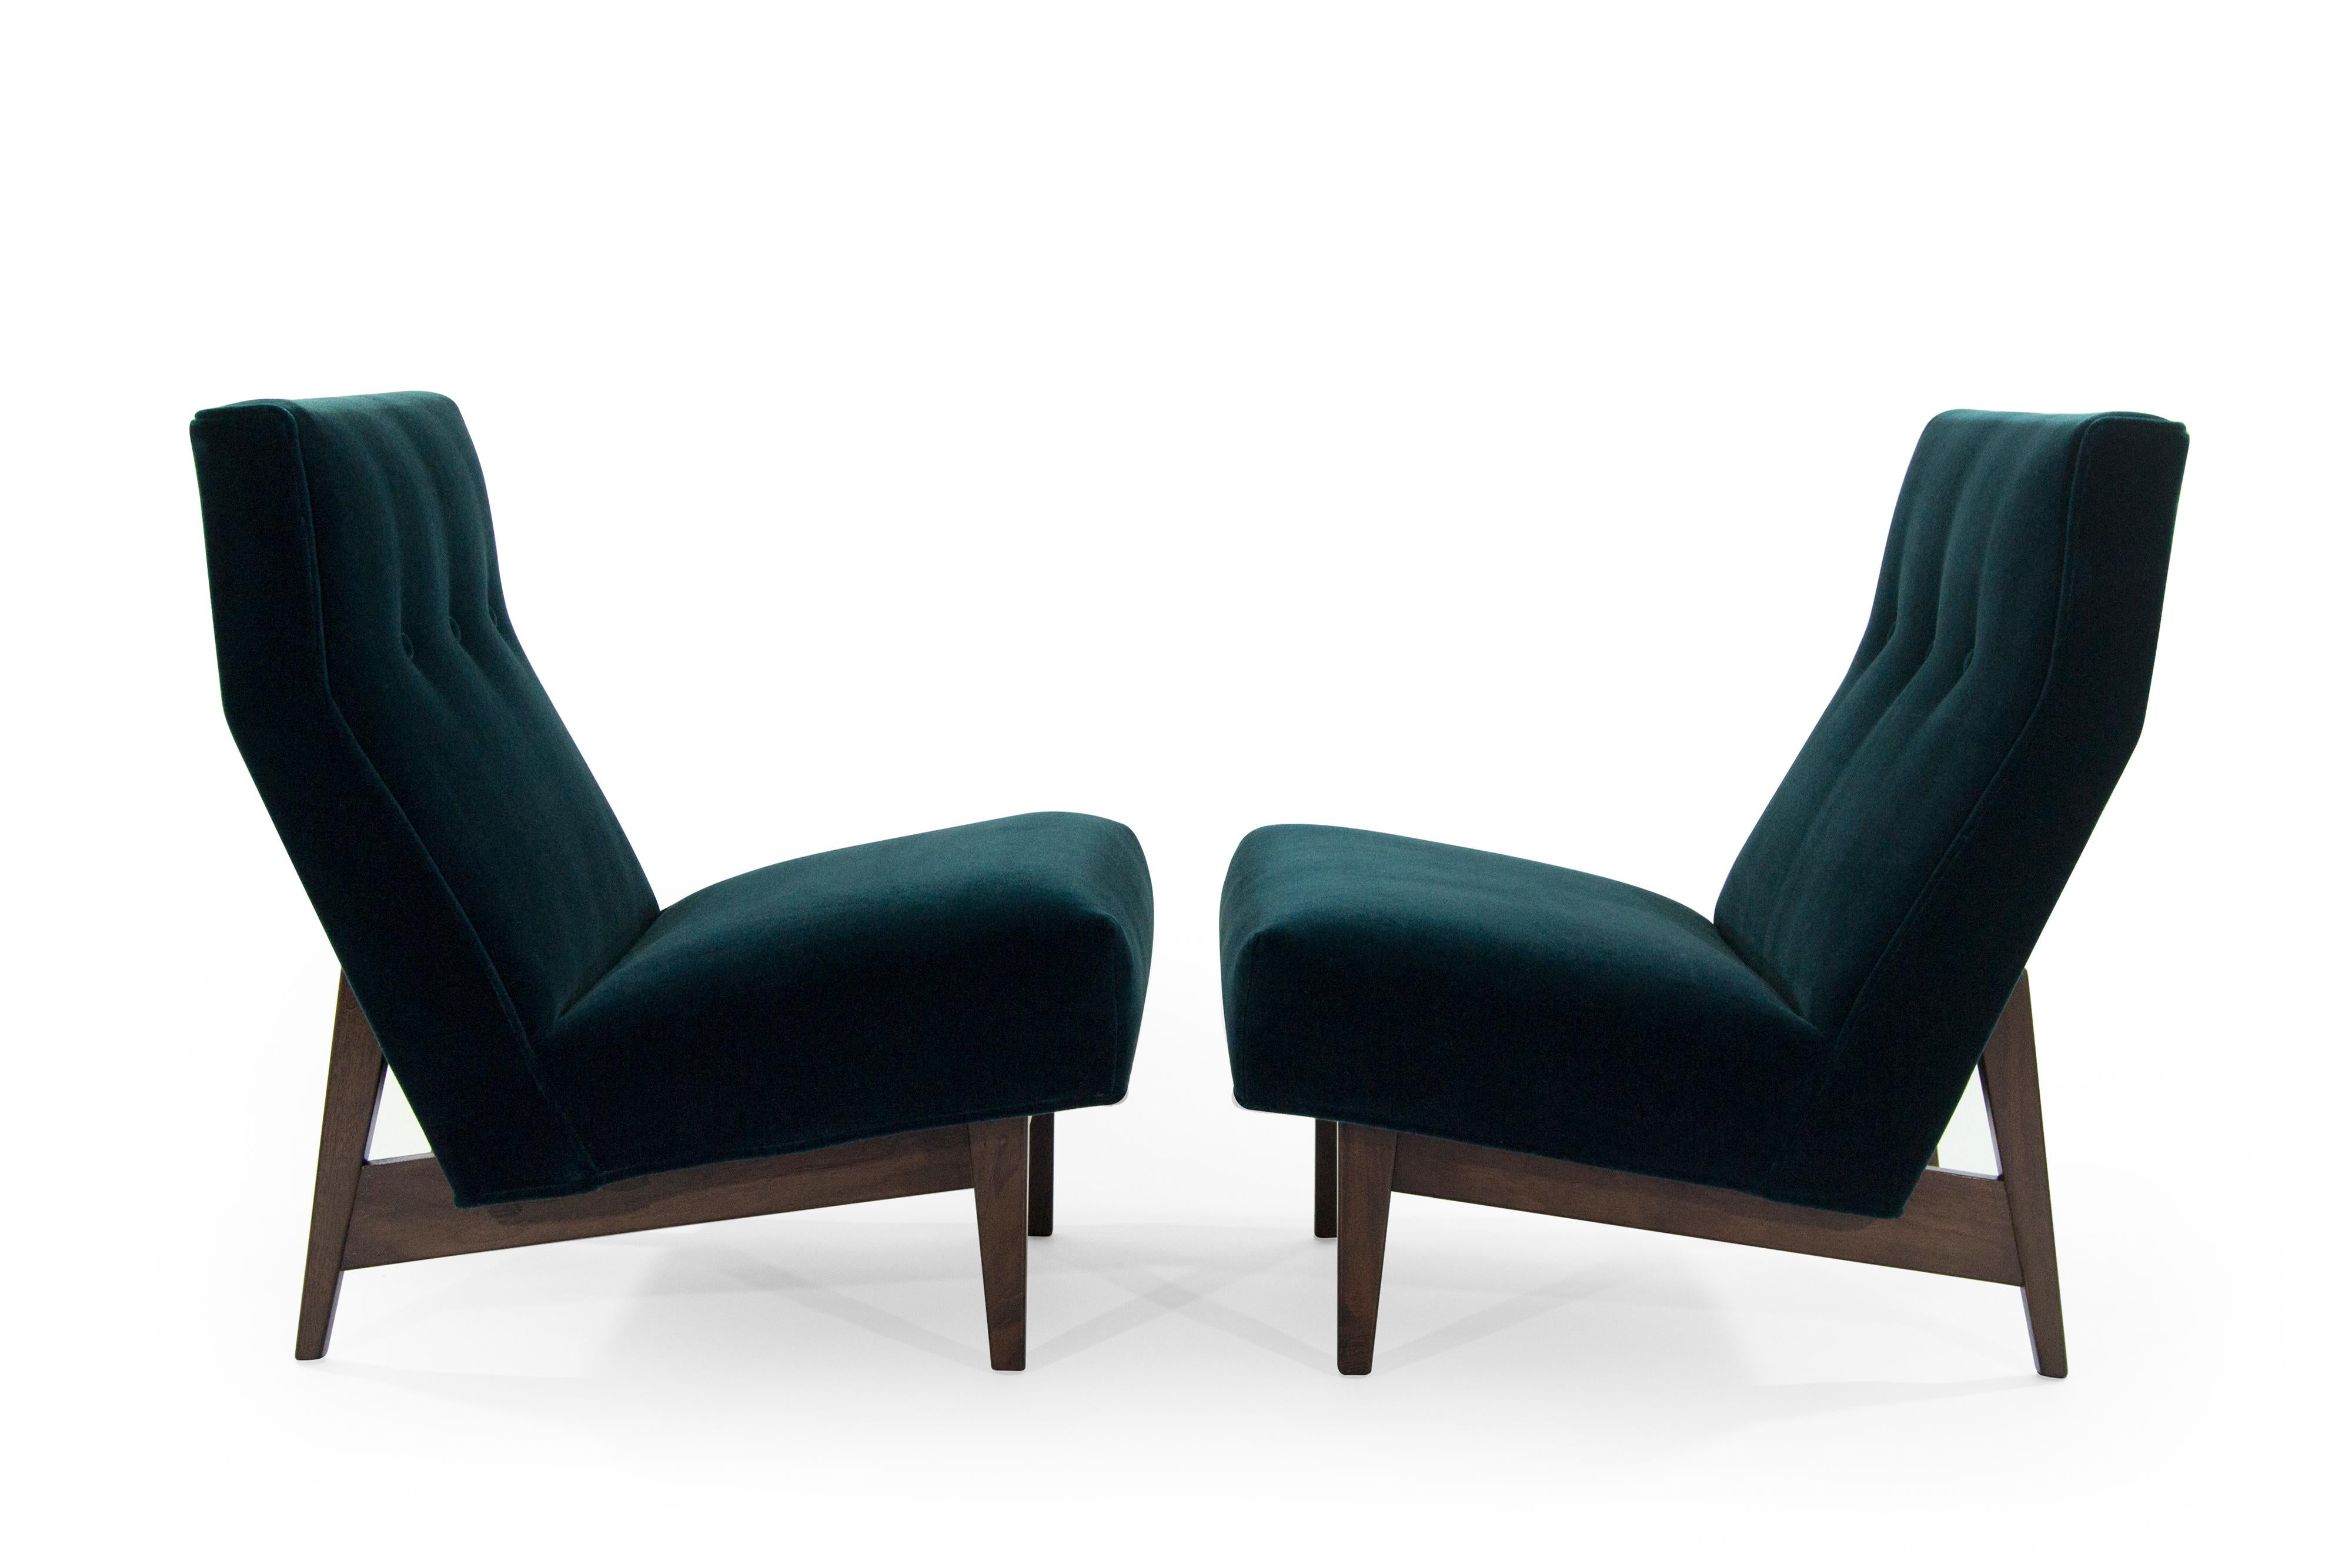 A set of slipper chairs designed by Jens Risom, circa 1950s. 

This pair has been fully restored down to its frame, fitted with hand cut high density foam. Newly upholstered in teal mohair 